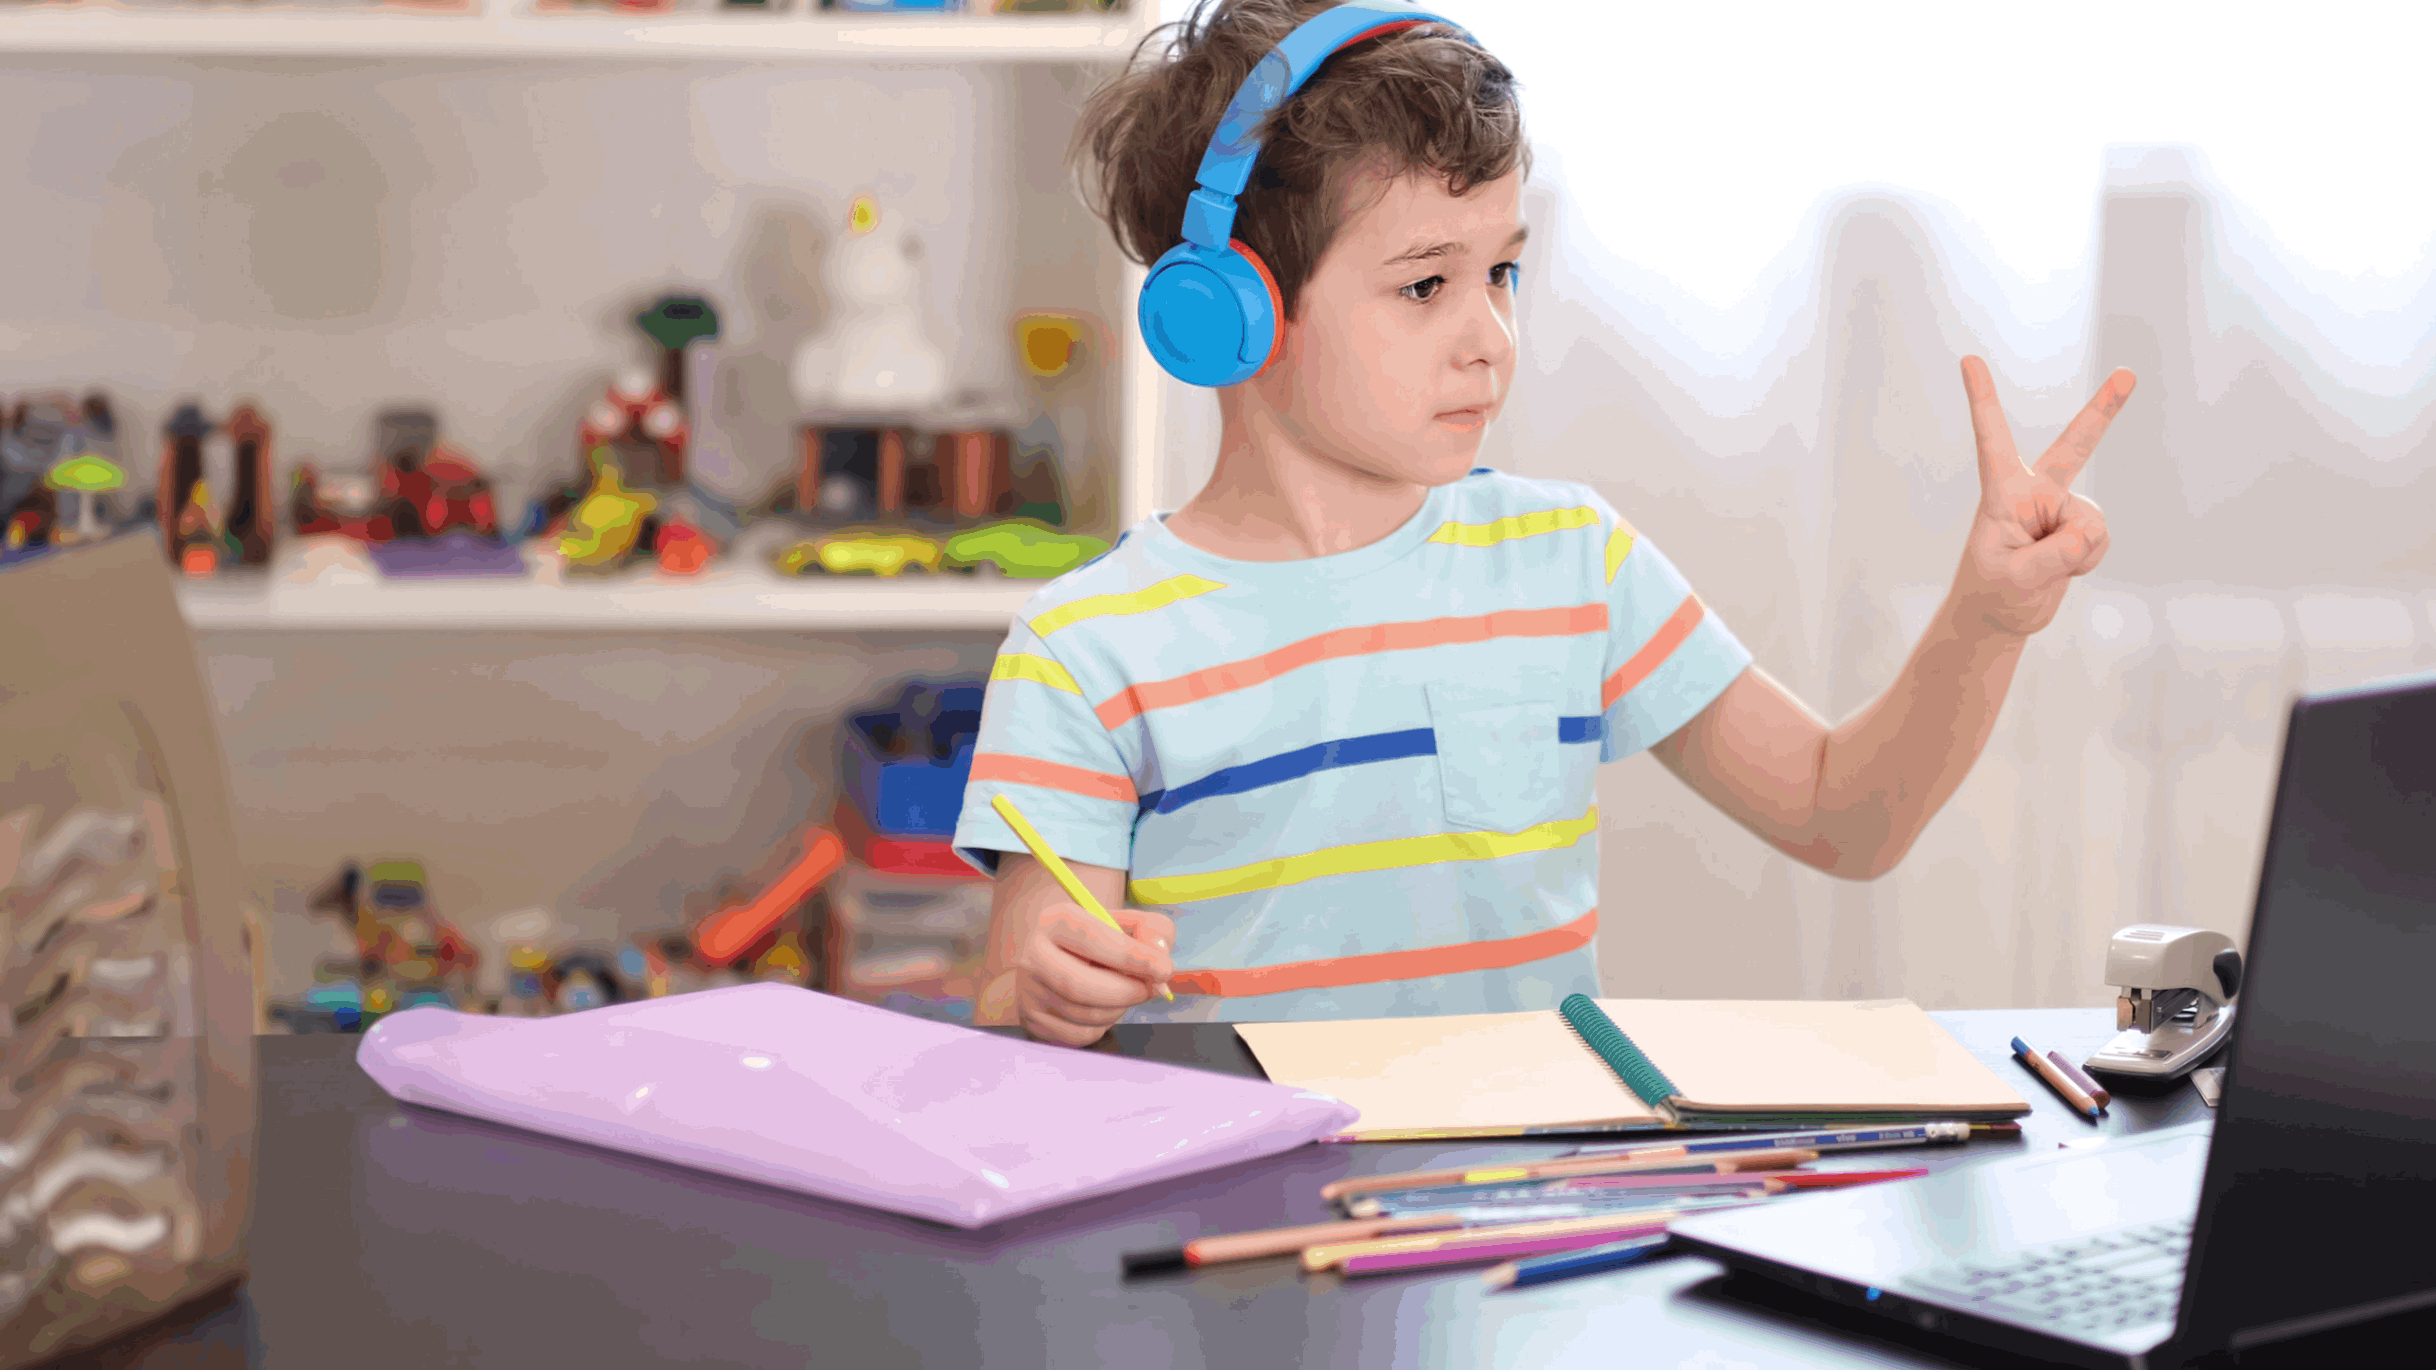 Online games to strengthen your child’s math skills